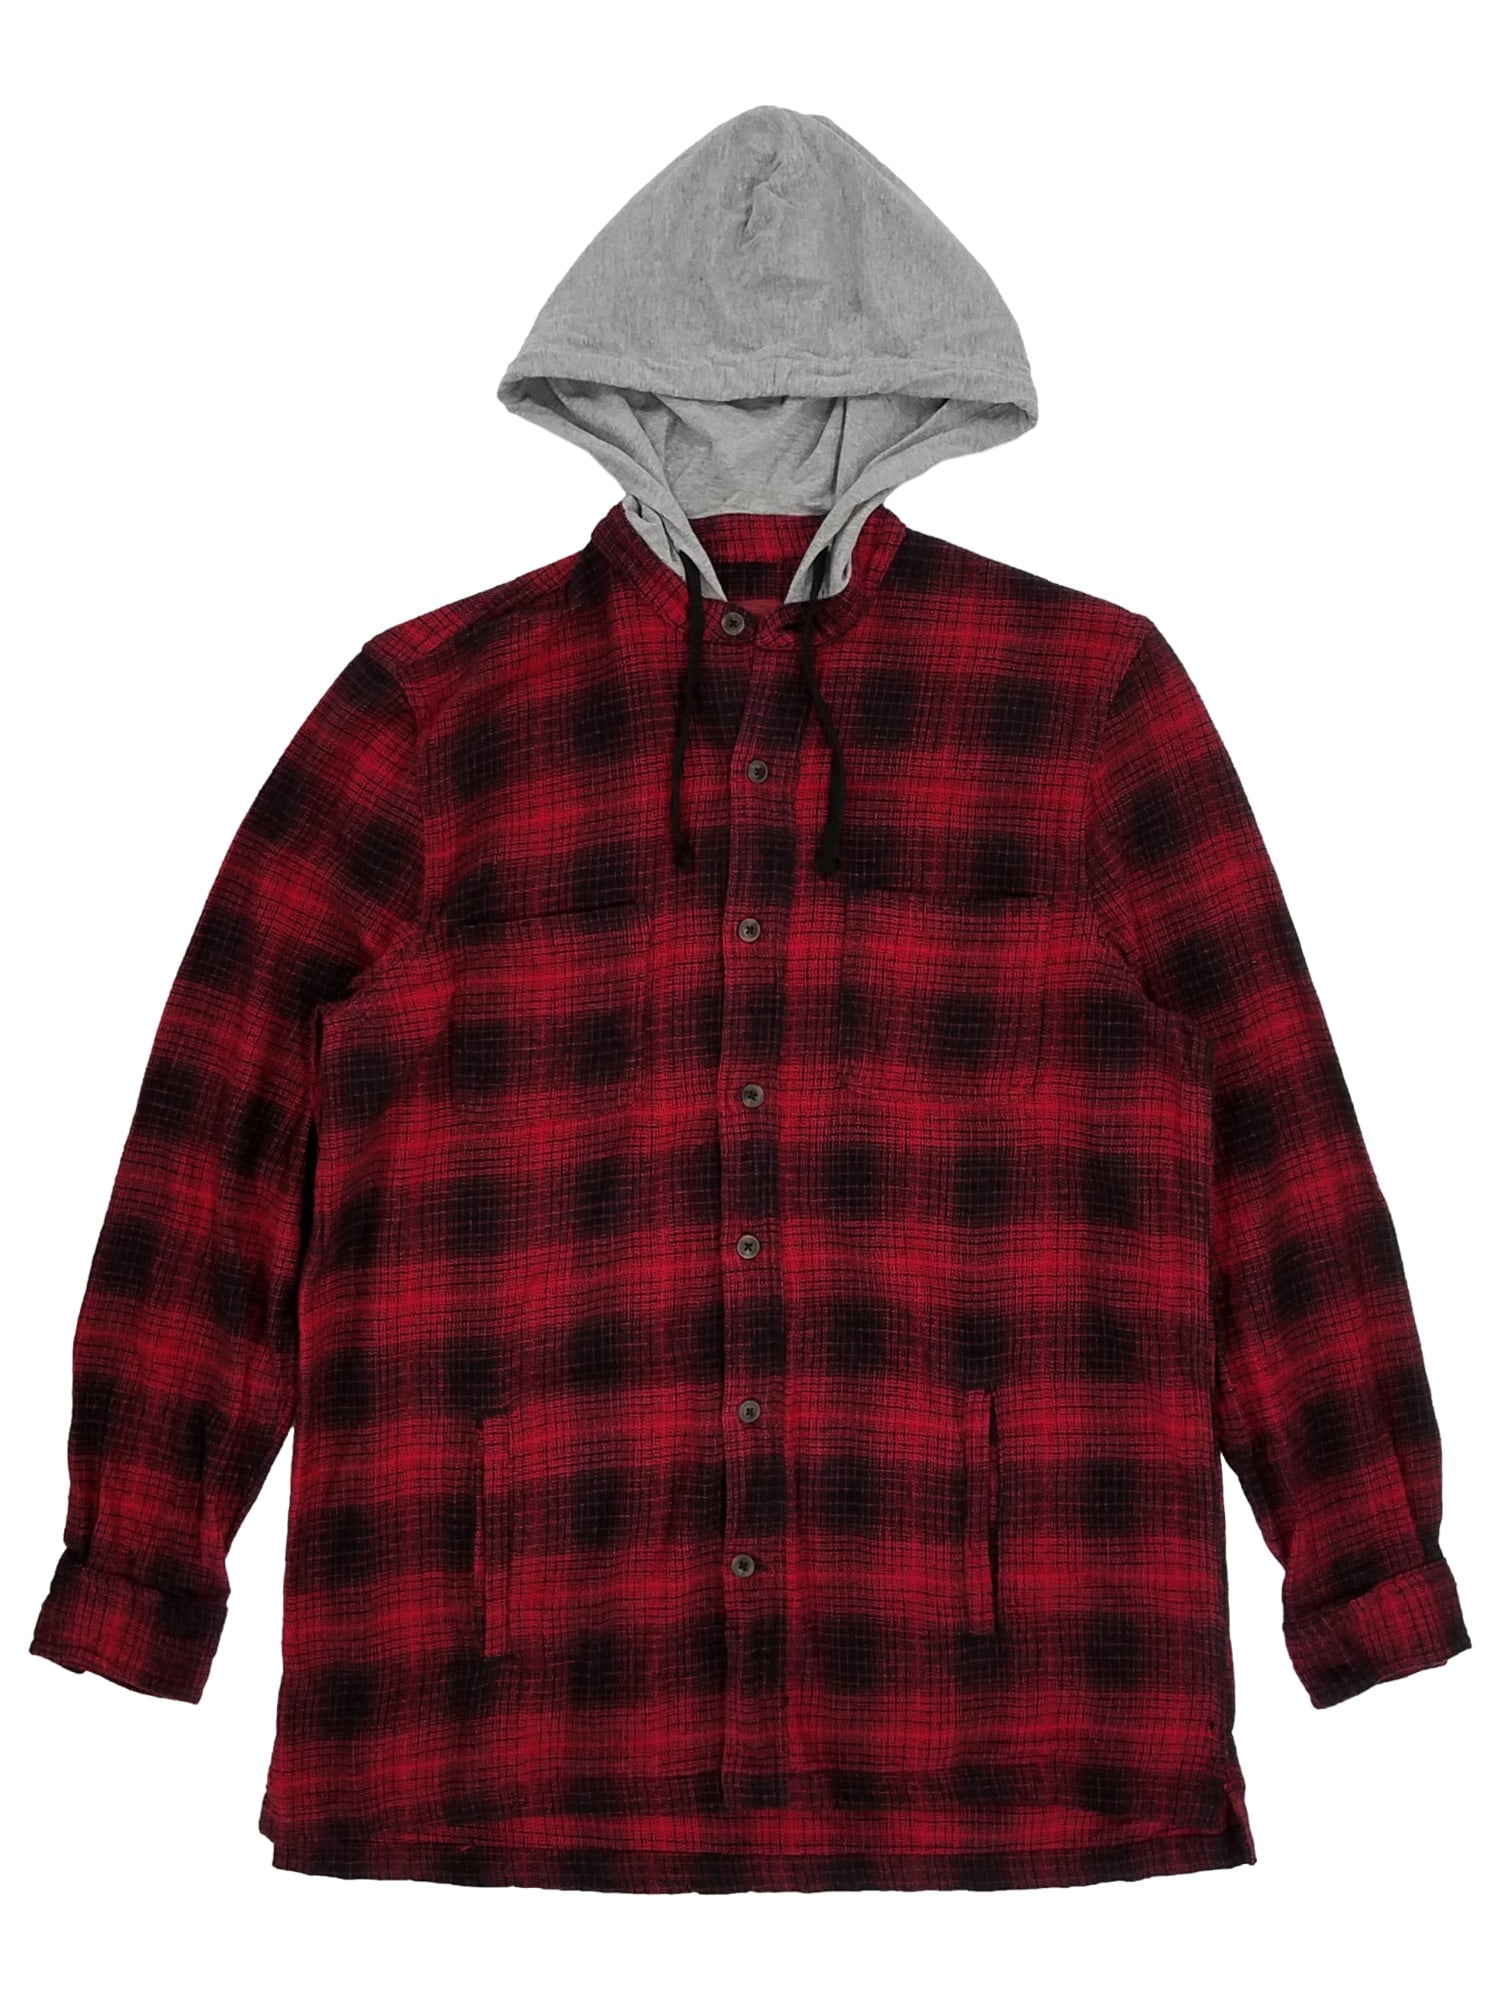 The Foundry Mens Big & Tall Red Plaid Hooded Flannel Shirt Jacket 3XL ...